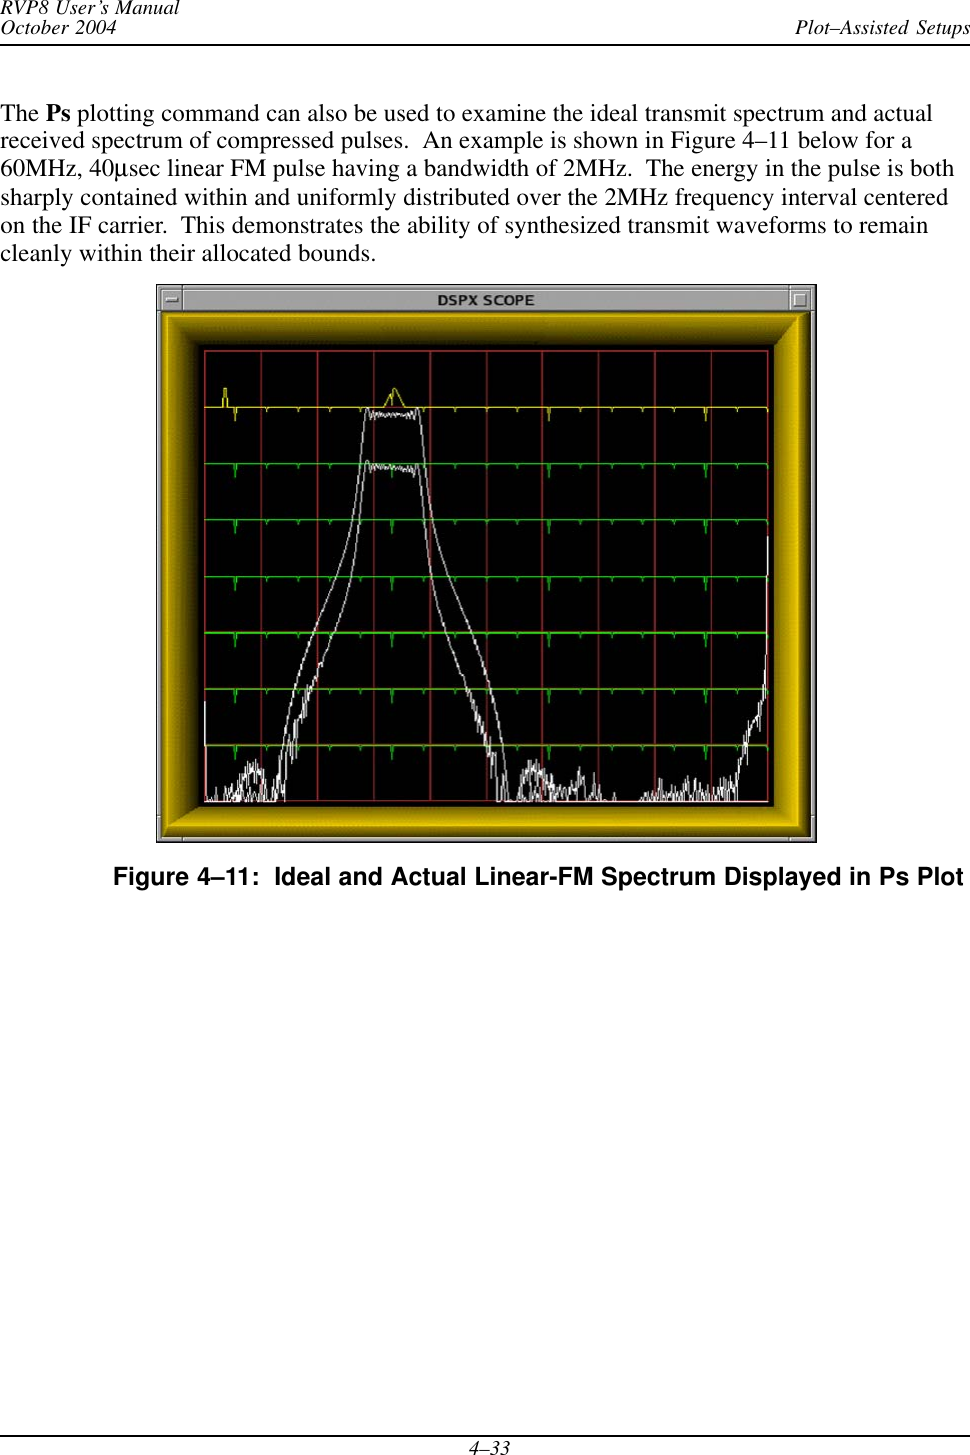 Plot–Assisted SetupsRVP8 User’s ManualOctober 20044–33The Ps plotting command can also be used to examine the ideal transmit spectrum and actualreceived spectrum of compressed pulses.  An example is shown in Figure 4–11 below for a60MHz, 40μsec linear FM pulse having a bandwidth of 2MHz.  The energy in the pulse is bothsharply contained within and uniformly distributed over the 2MHz frequency interval centeredon the IF carrier.  This demonstrates the ability of synthesized transmit waveforms to remaincleanly within their allocated bounds.Figure 4–11:  Ideal and Actual Linear-FM Spectrum Displayed in Ps Plot